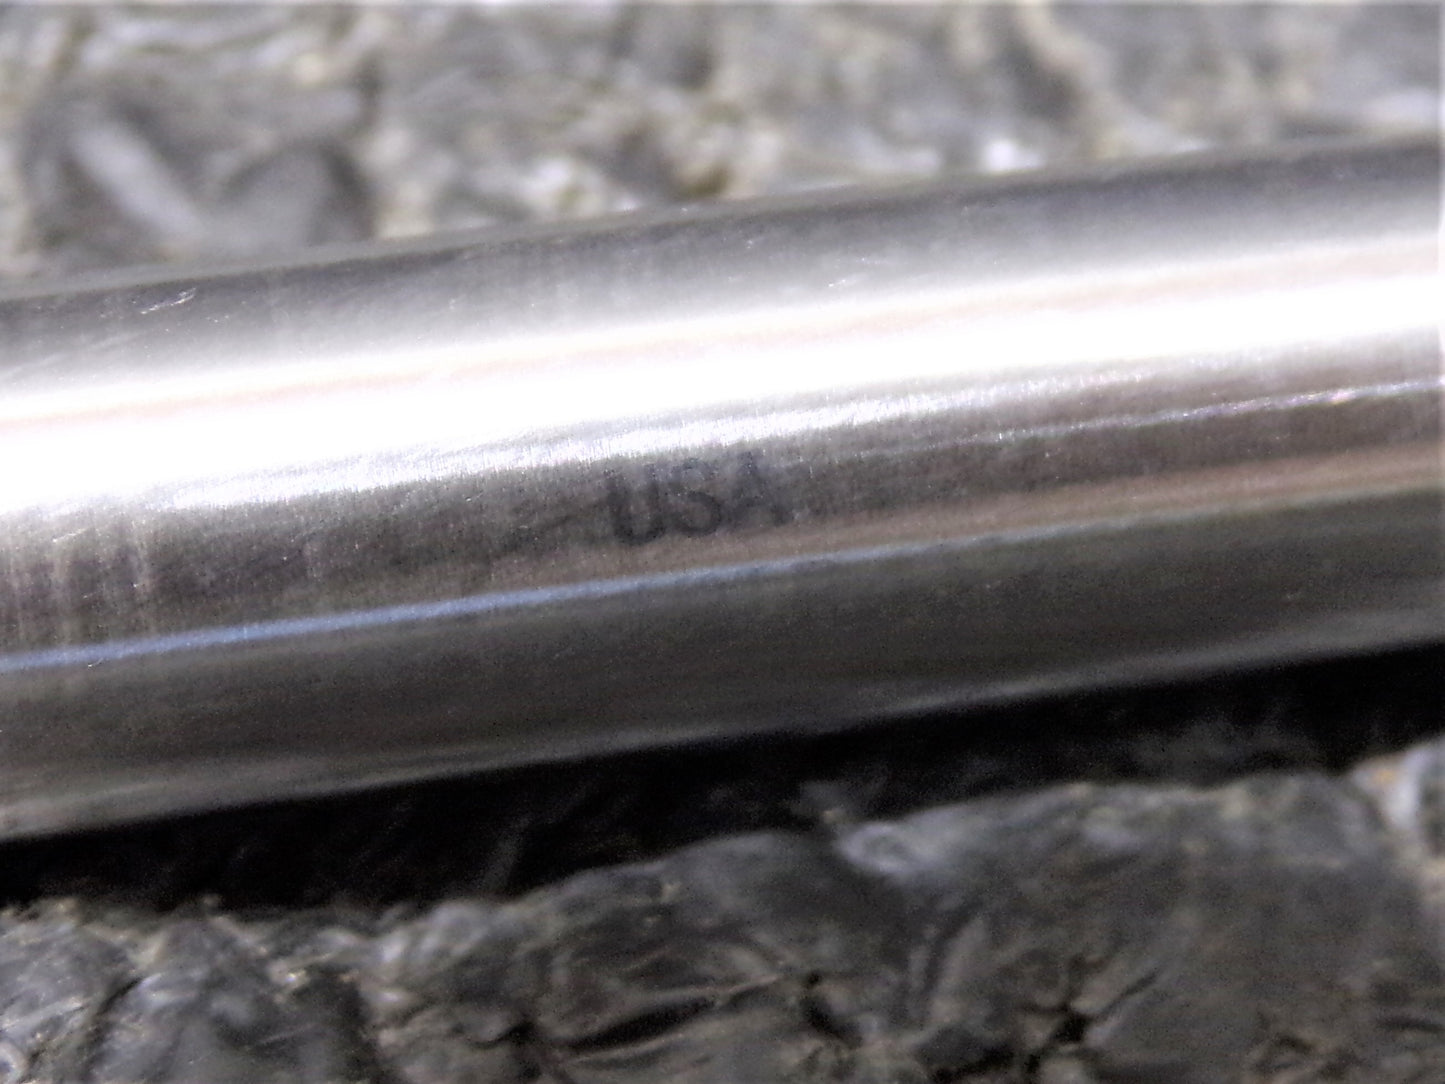 MELIN TOOL COMPANY Rougher/Finisher End Mill R.125 1/2", Overall Length: 3-1/4" (CR00670-WTA16)